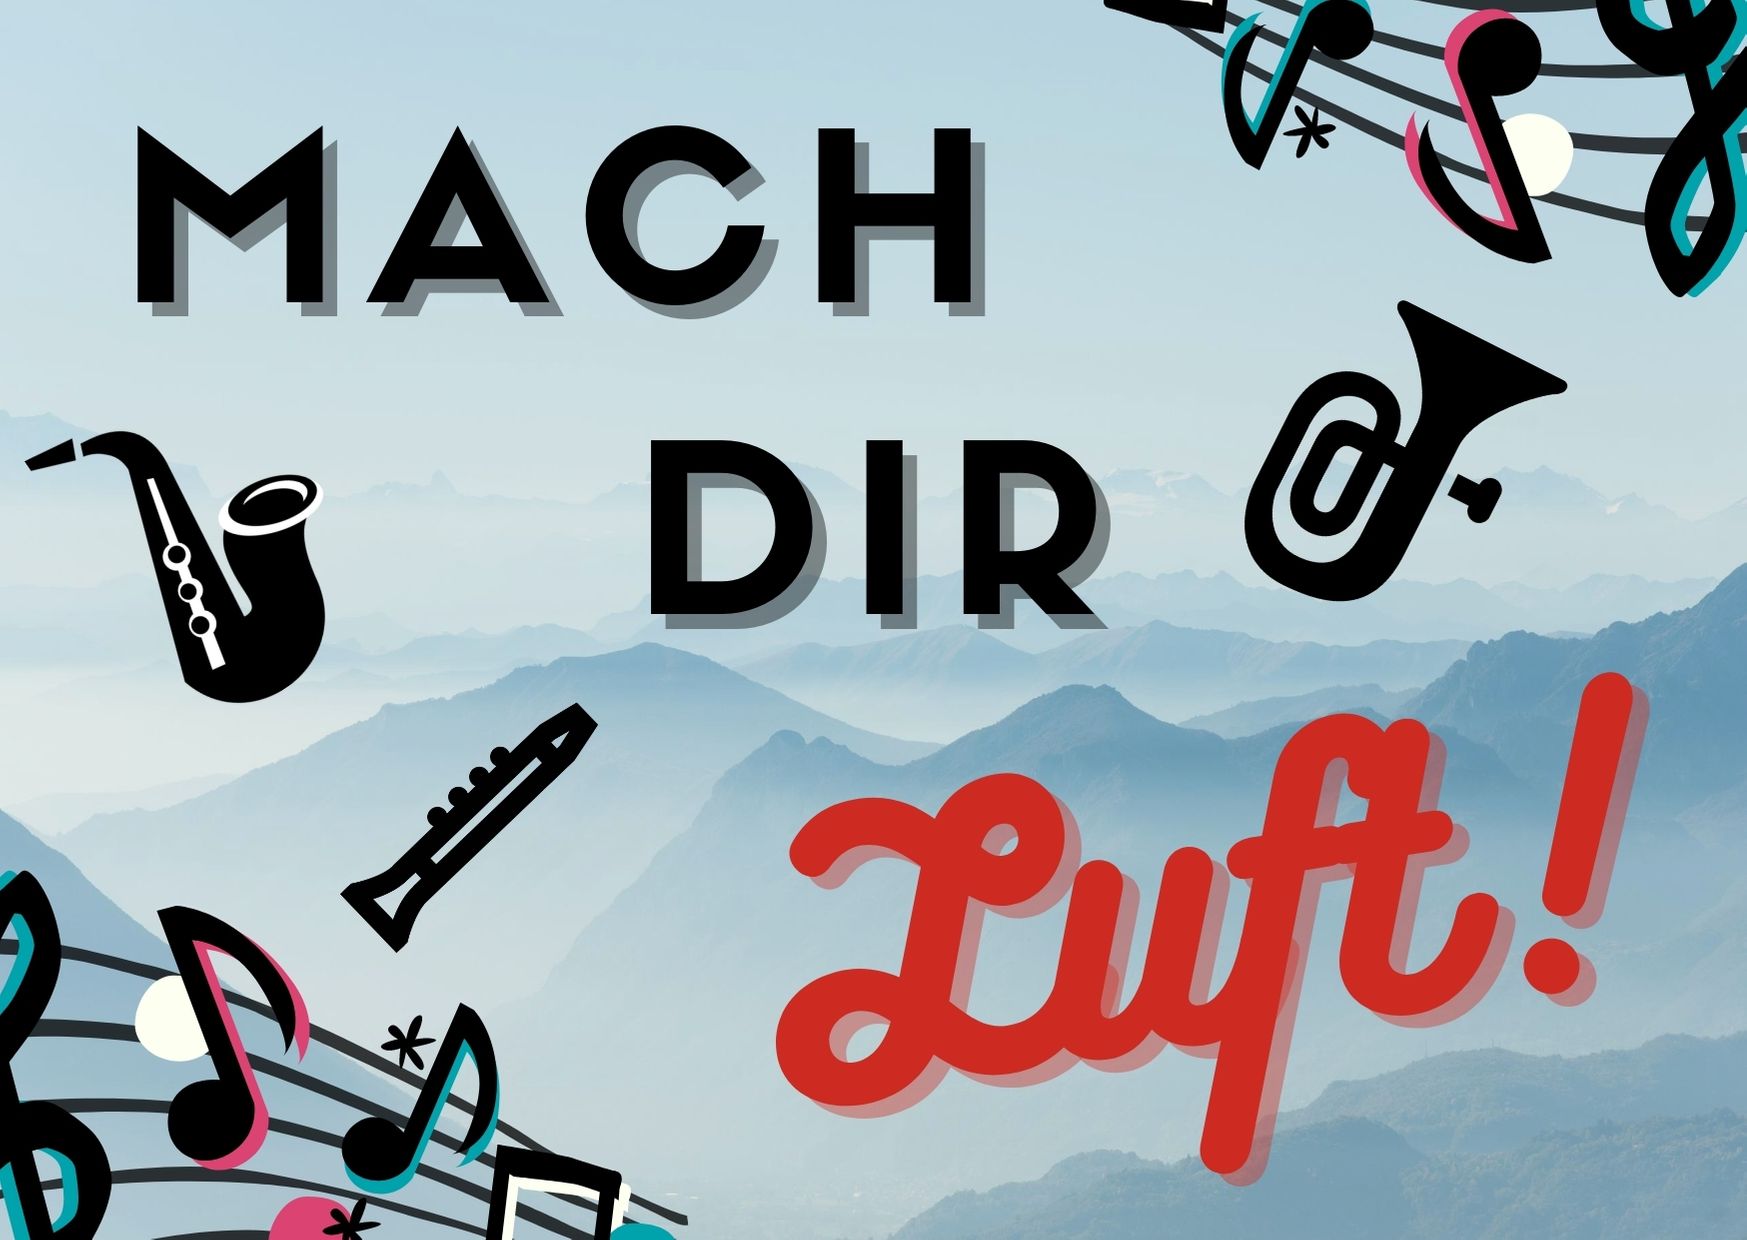 You are currently viewing Mach dir Luft